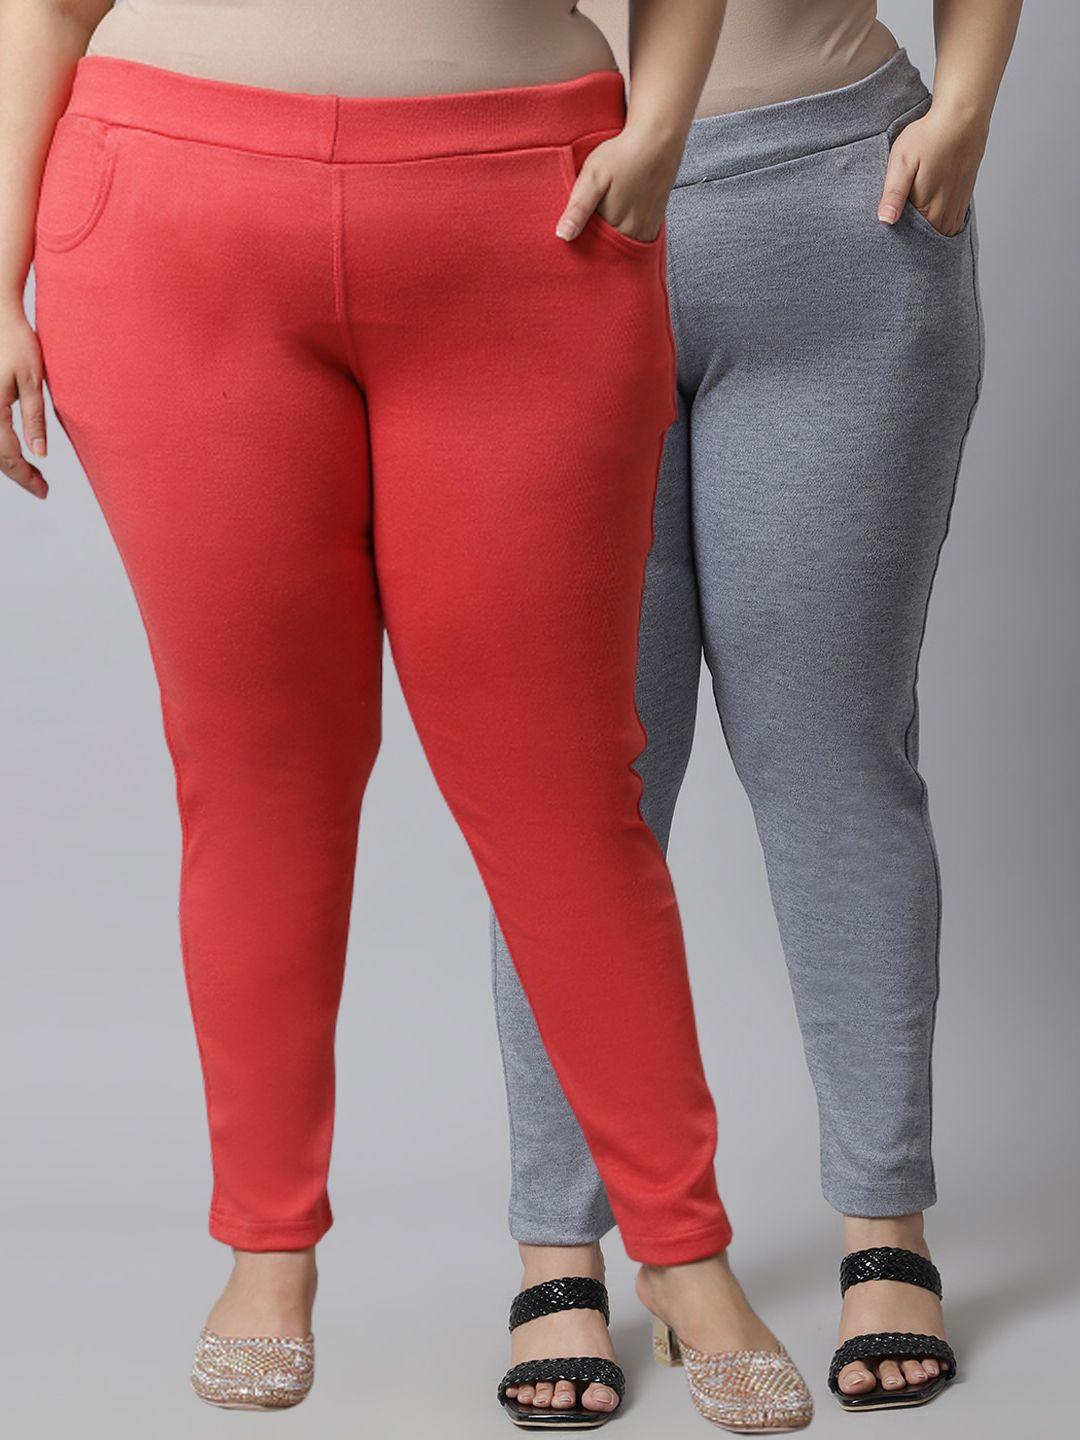 tag 7 plus plus size women pack of 2 peach & grey solid ankle-length woolen leggings